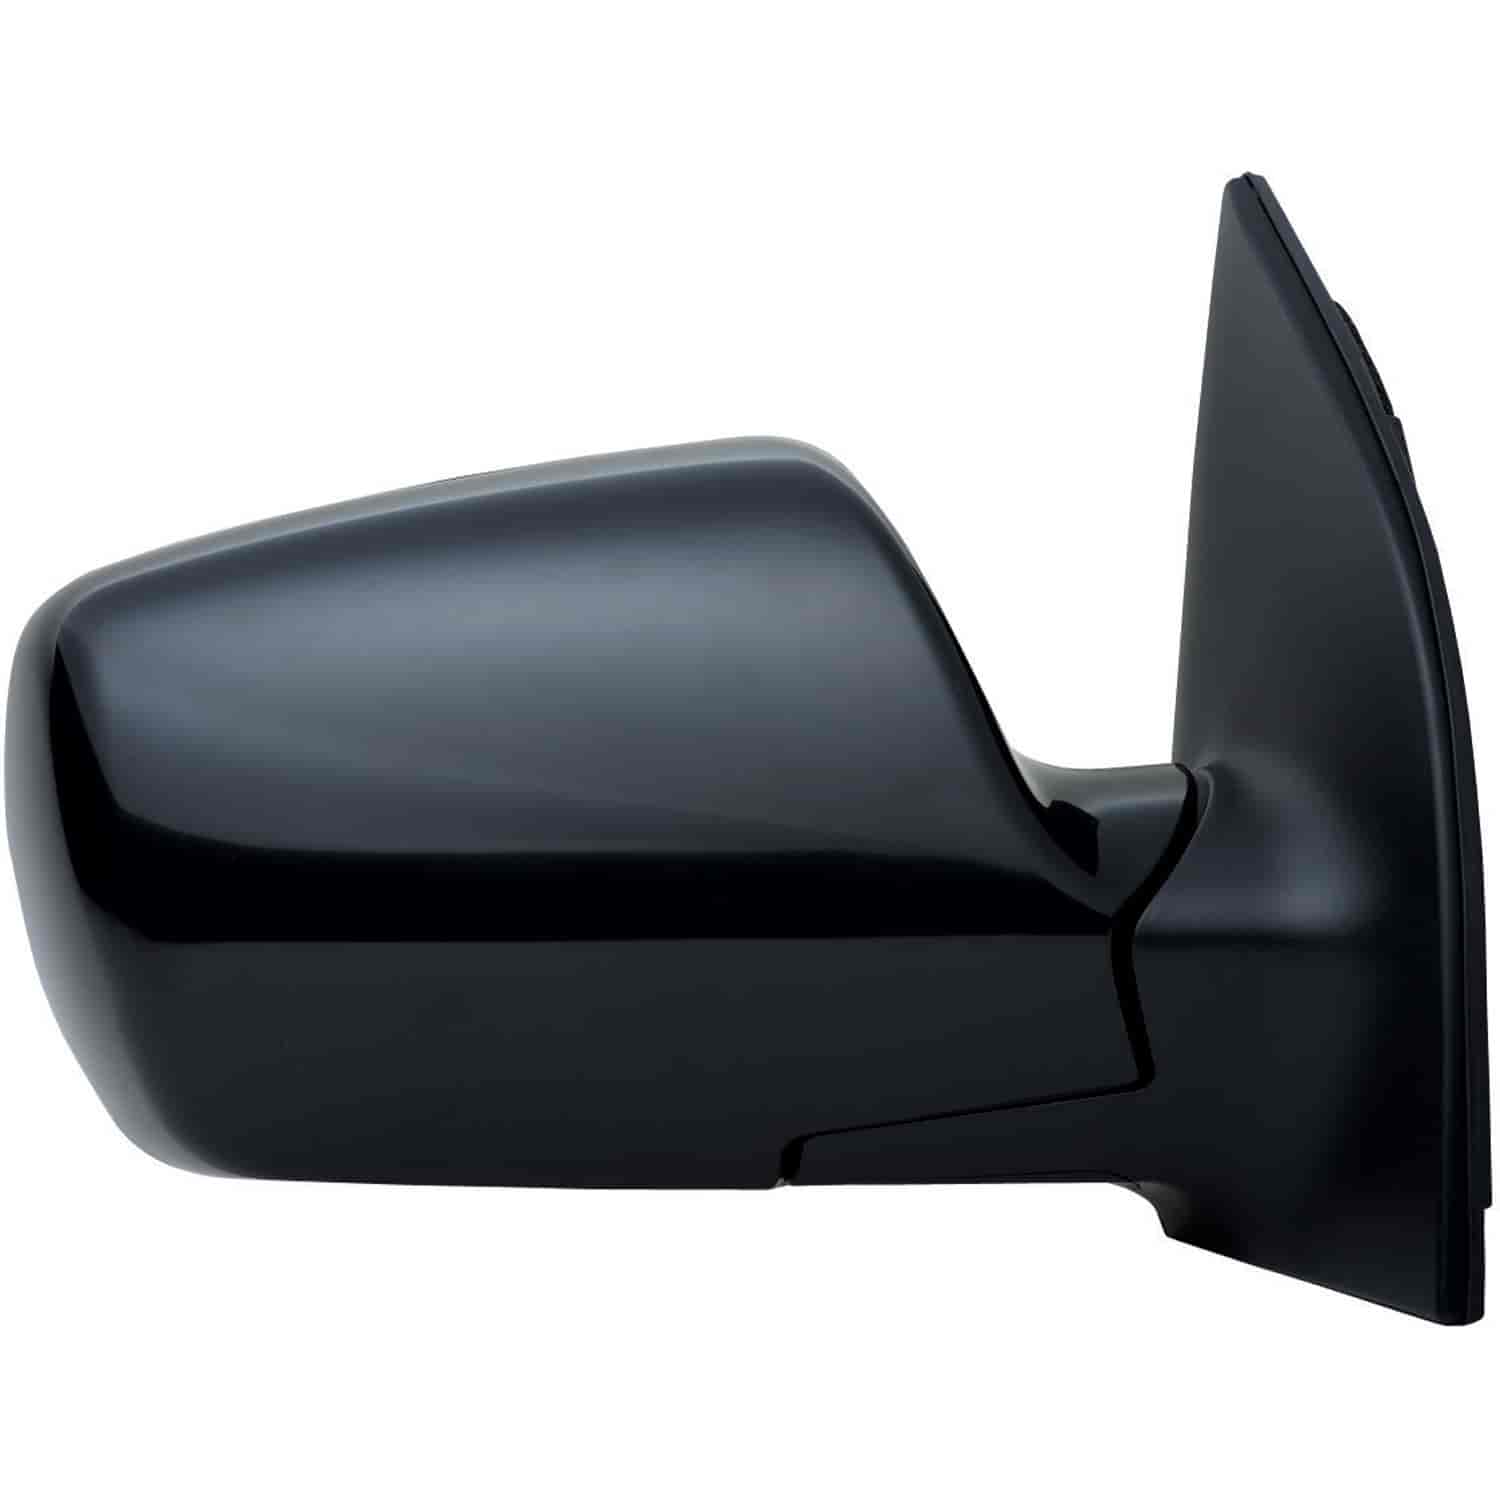 OEM Style Replacement mirror for 06-07 Kia Sedona memory passenger side mirror tested to fit and fun